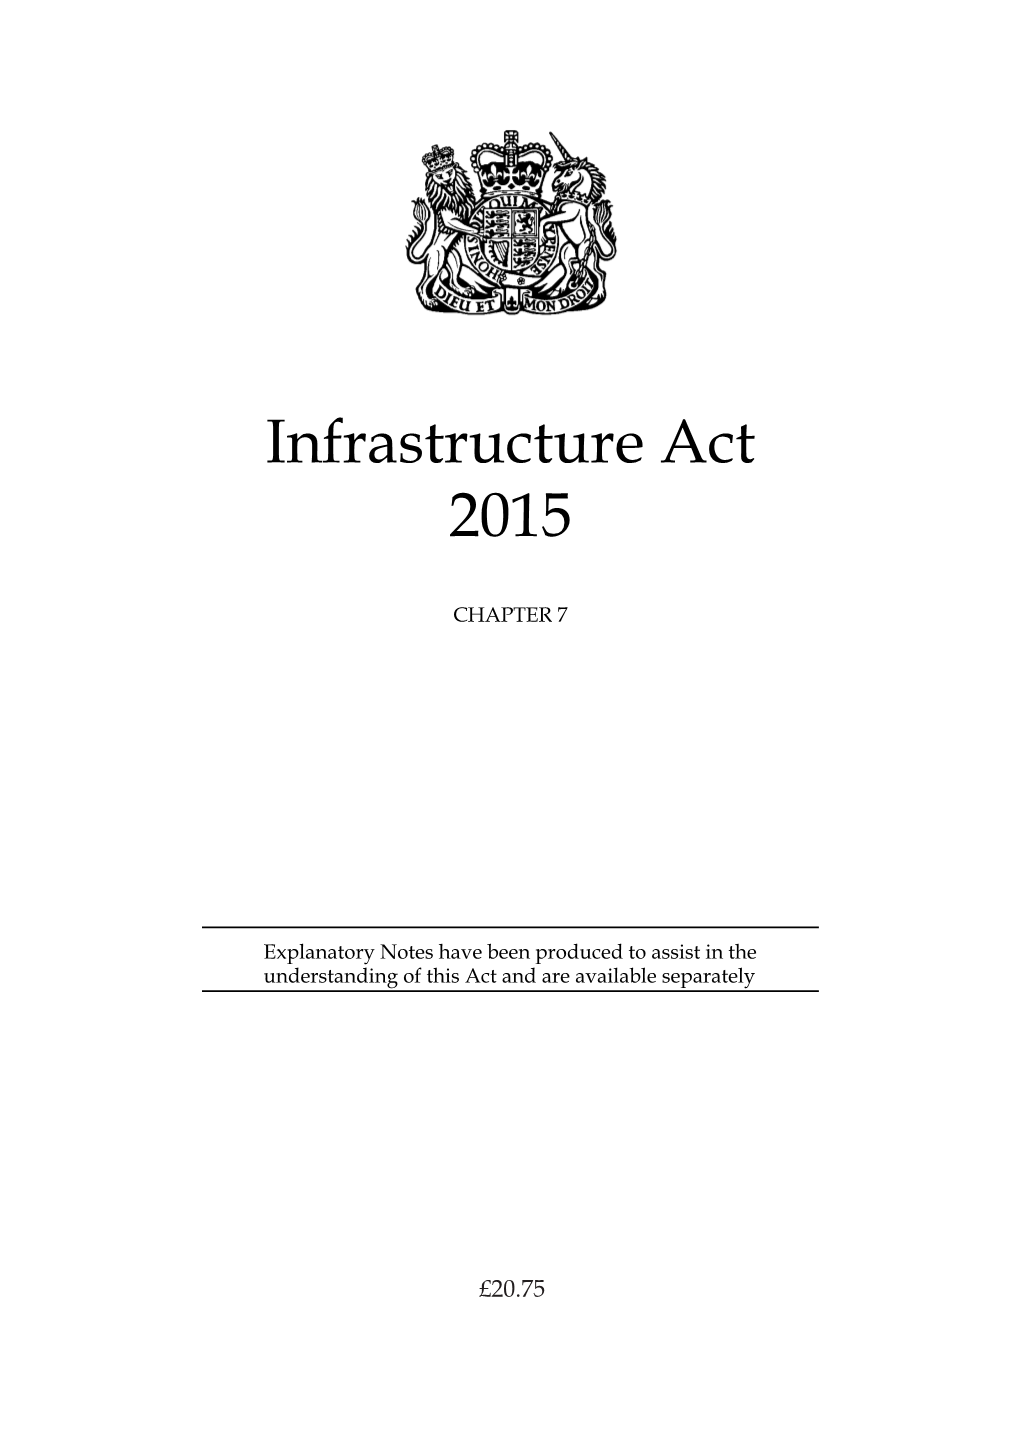 Infrastructure Act 2015